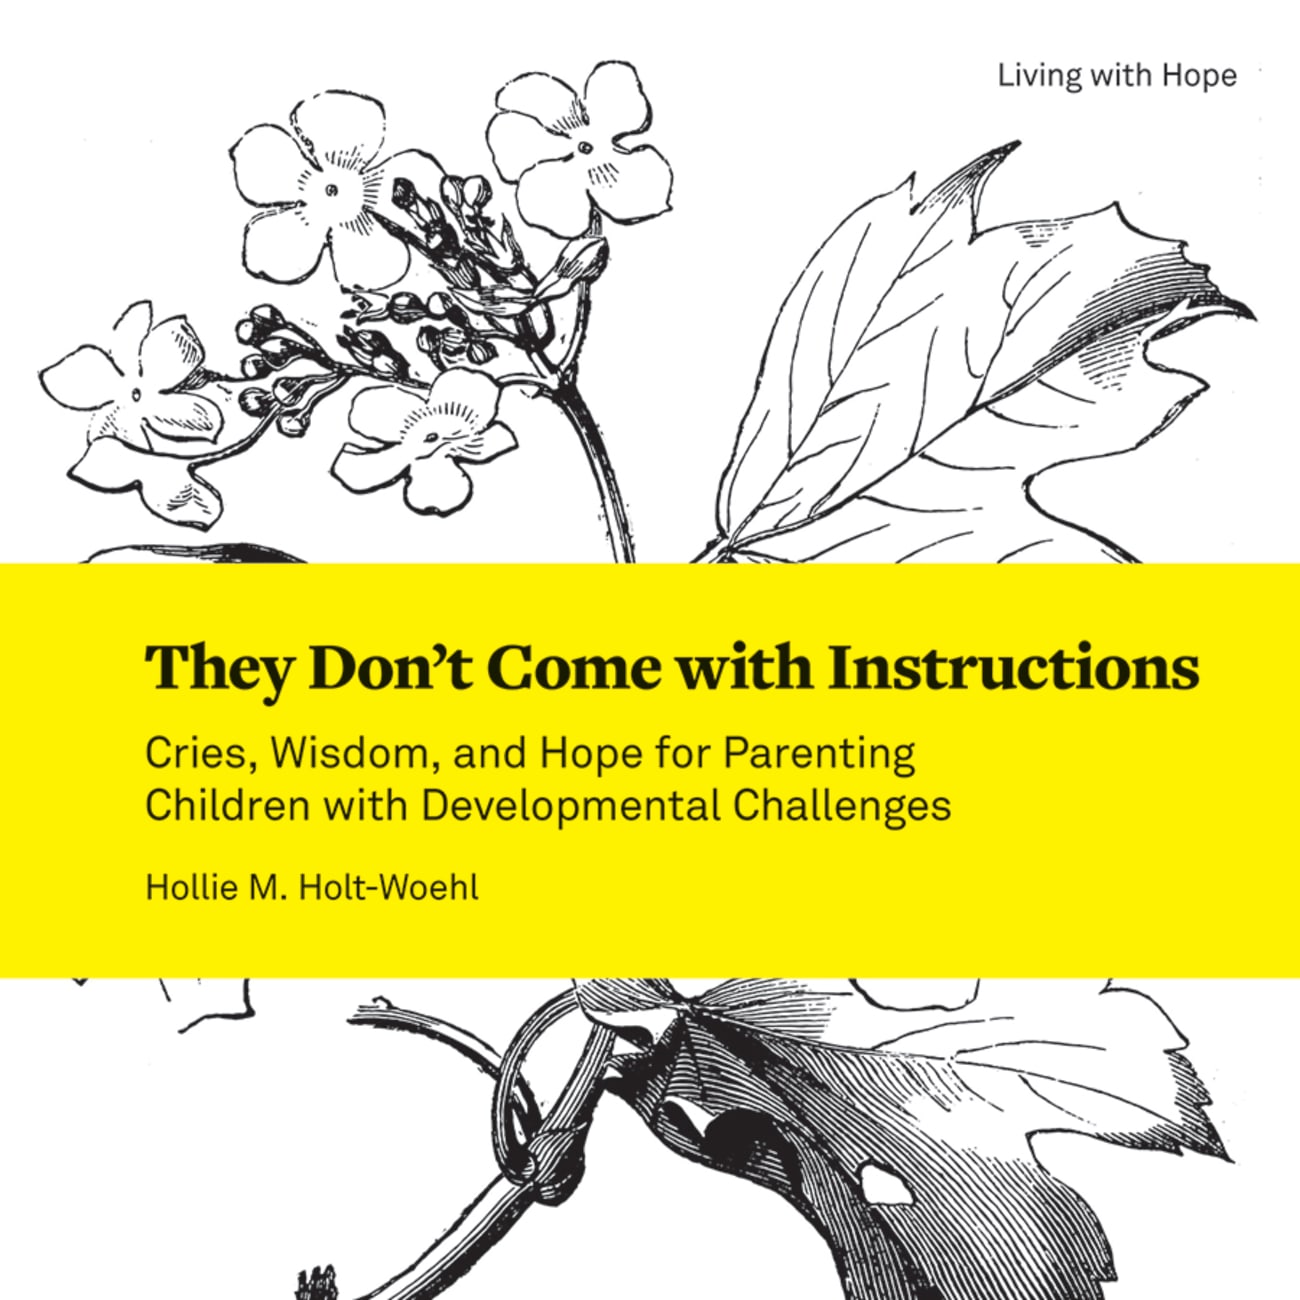 They Don't Come With Instructions - Cries, Wisdom, and Hope For Parenting Children With Developmental Challenges (Living With Hope Series) Paperback